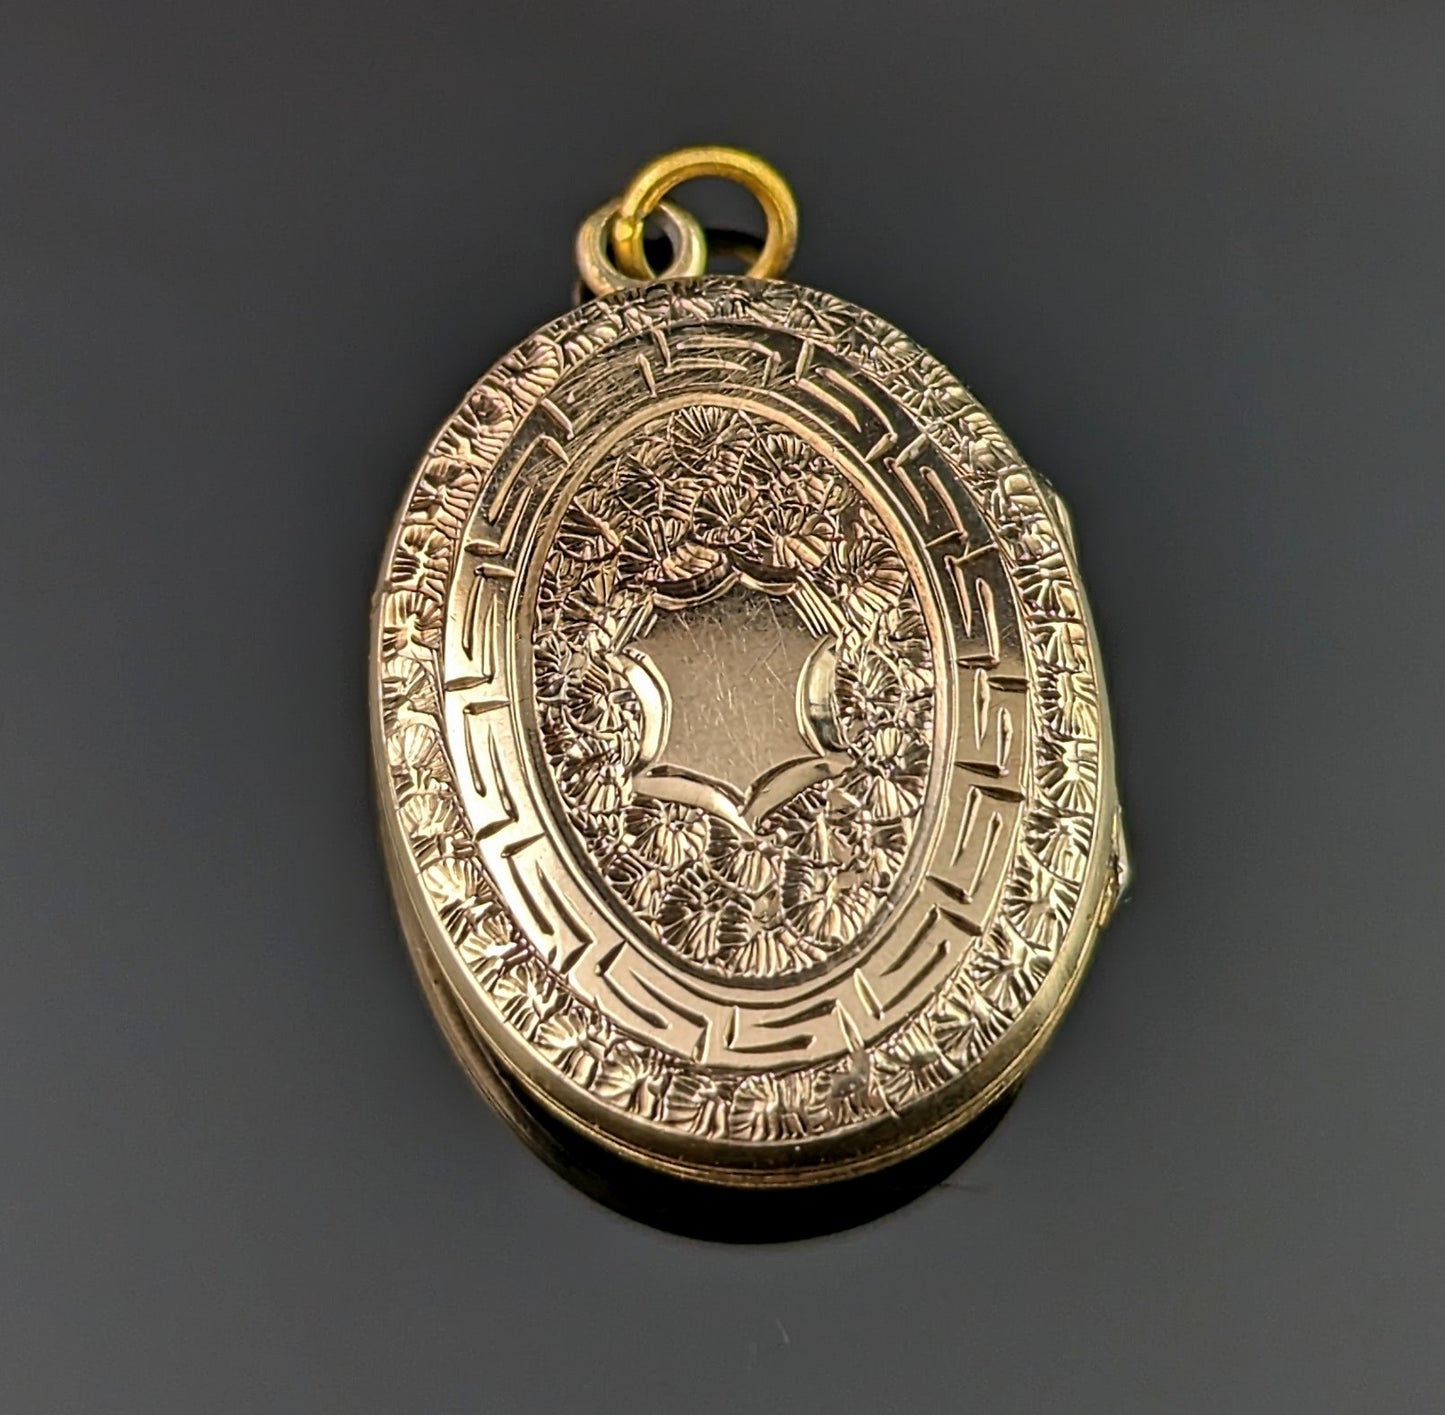 Antique Mourning locket, 9ct gold front and back, Black and White enamel